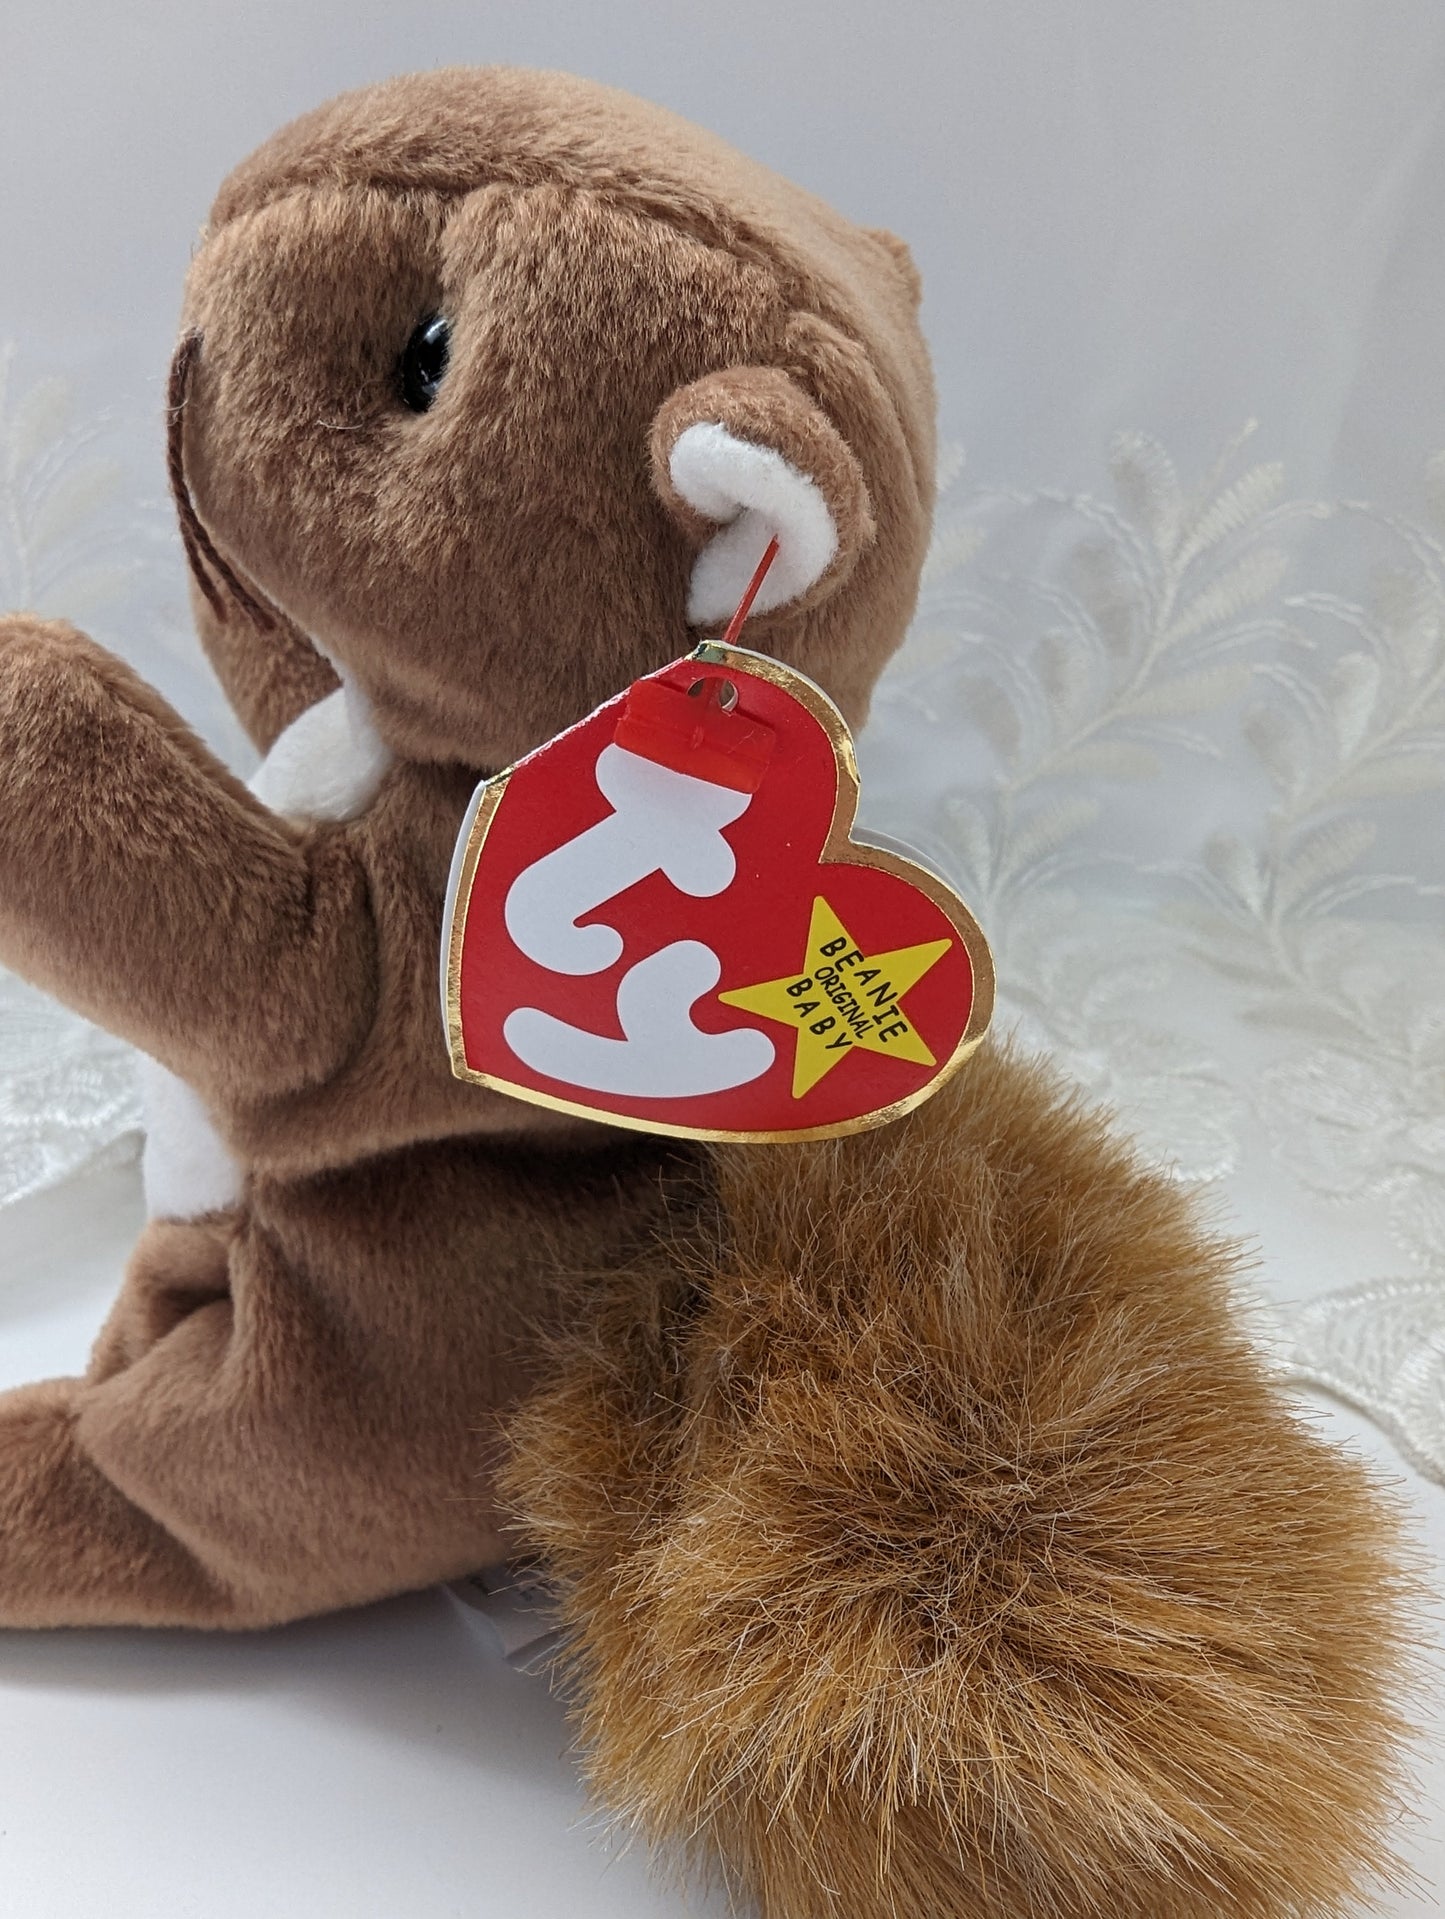 Ty Beanie Baby - Nuts The Squirrel (6in) - Vintage Beanies Canada